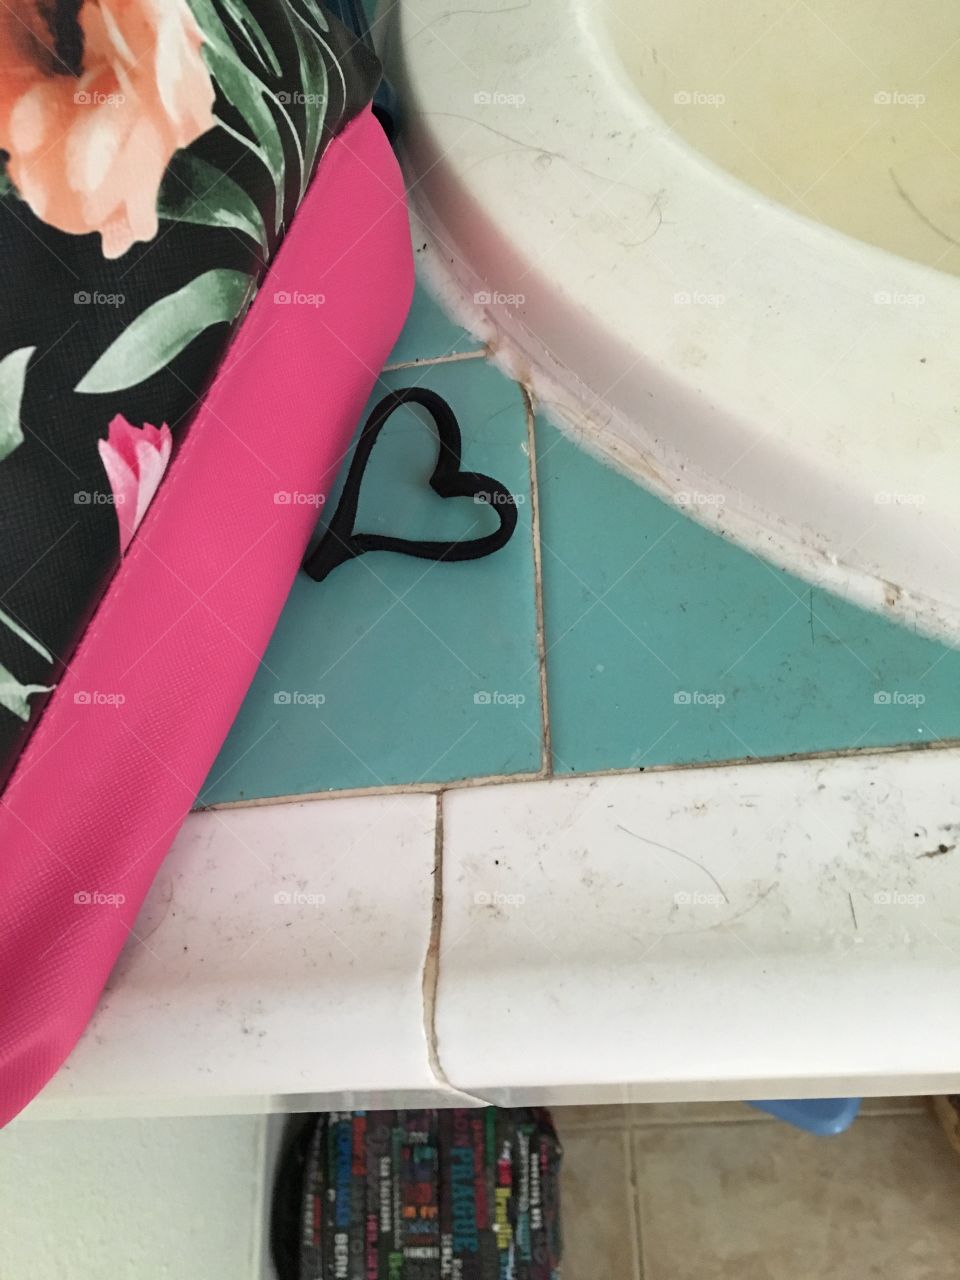 Hair tie in the shape of a heart